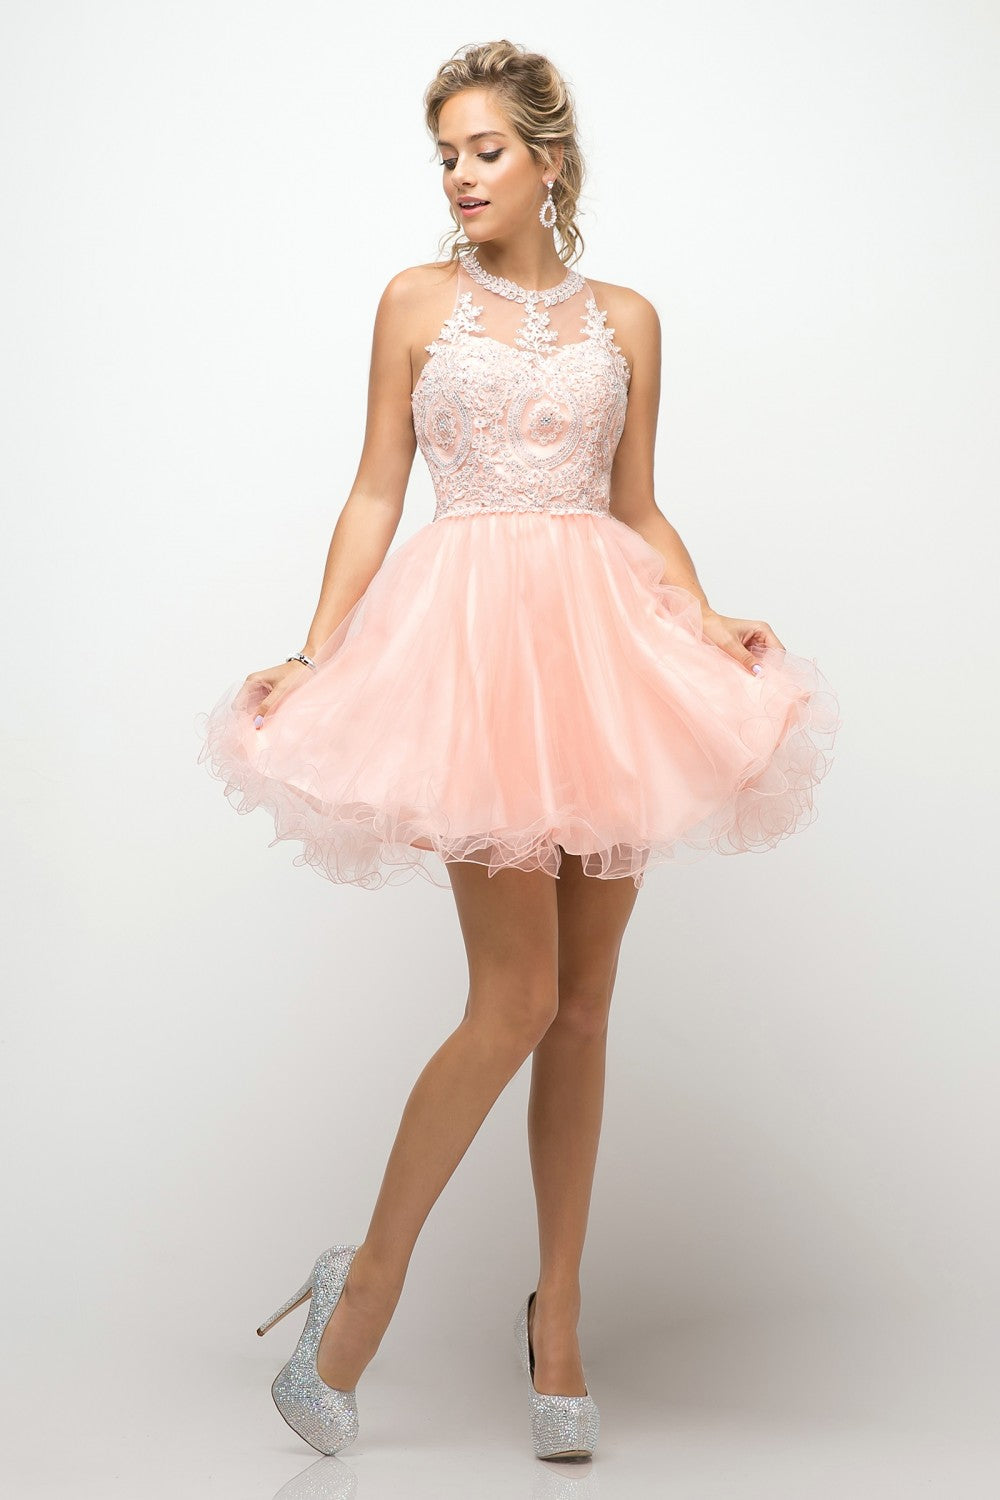 CD UJ0119 - Short A-Line Homecoming Dress with Lace Embroidered Top & Tulle Skirt Homecoming Cinderella Divine XS BLUSH 